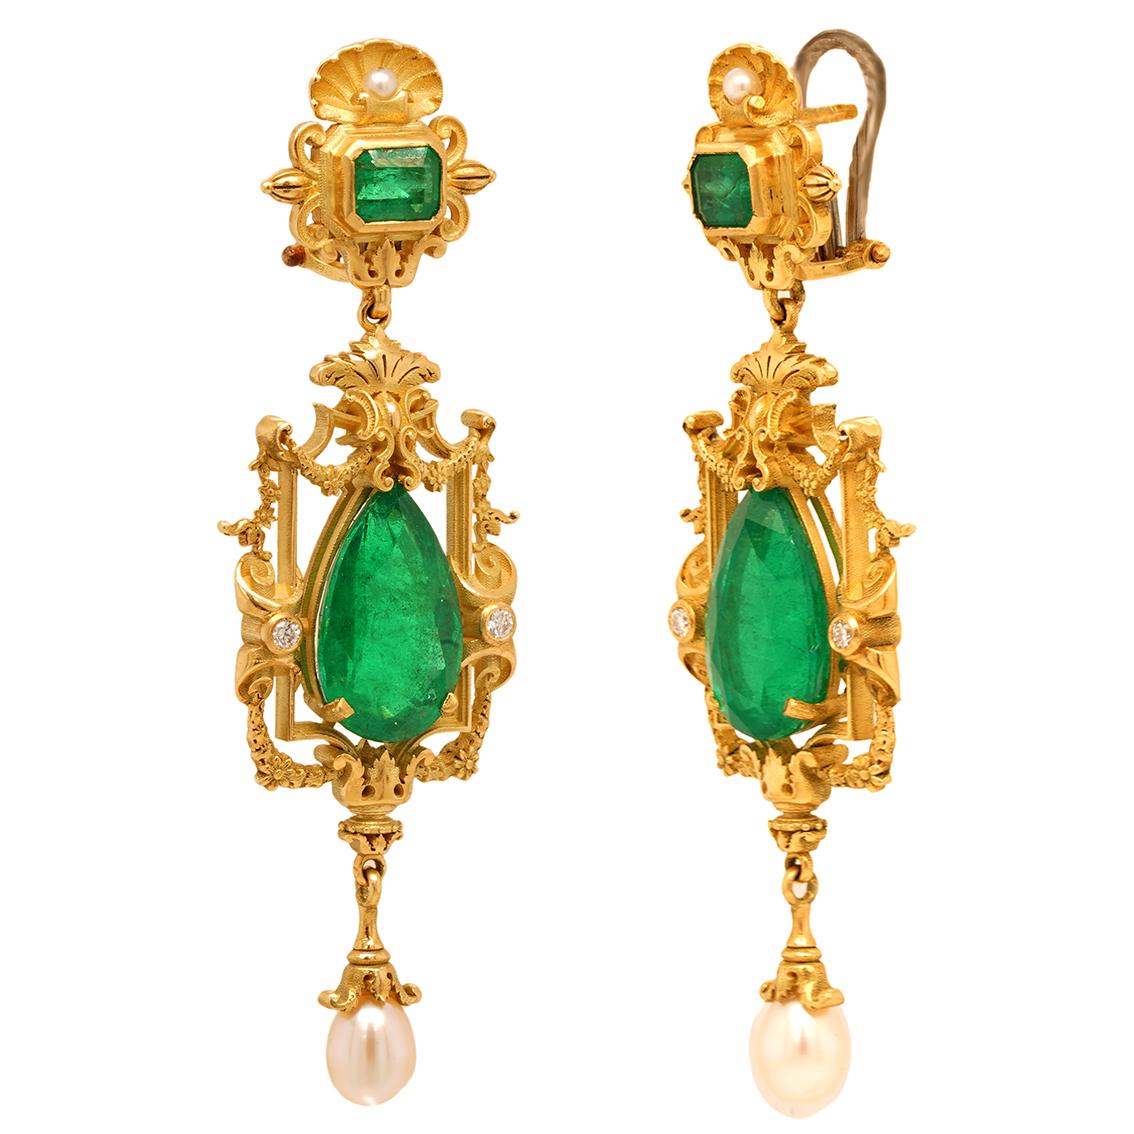 VENUS WITH A MIRROR EMERALD EARRINGS

In Ancient Rome, Venus was long associated with both emeralds and pearls having risen from the ocean emerging on an oyster. Inspired by the sheer opulence and intricacy of grand gilded antique mirrors, these